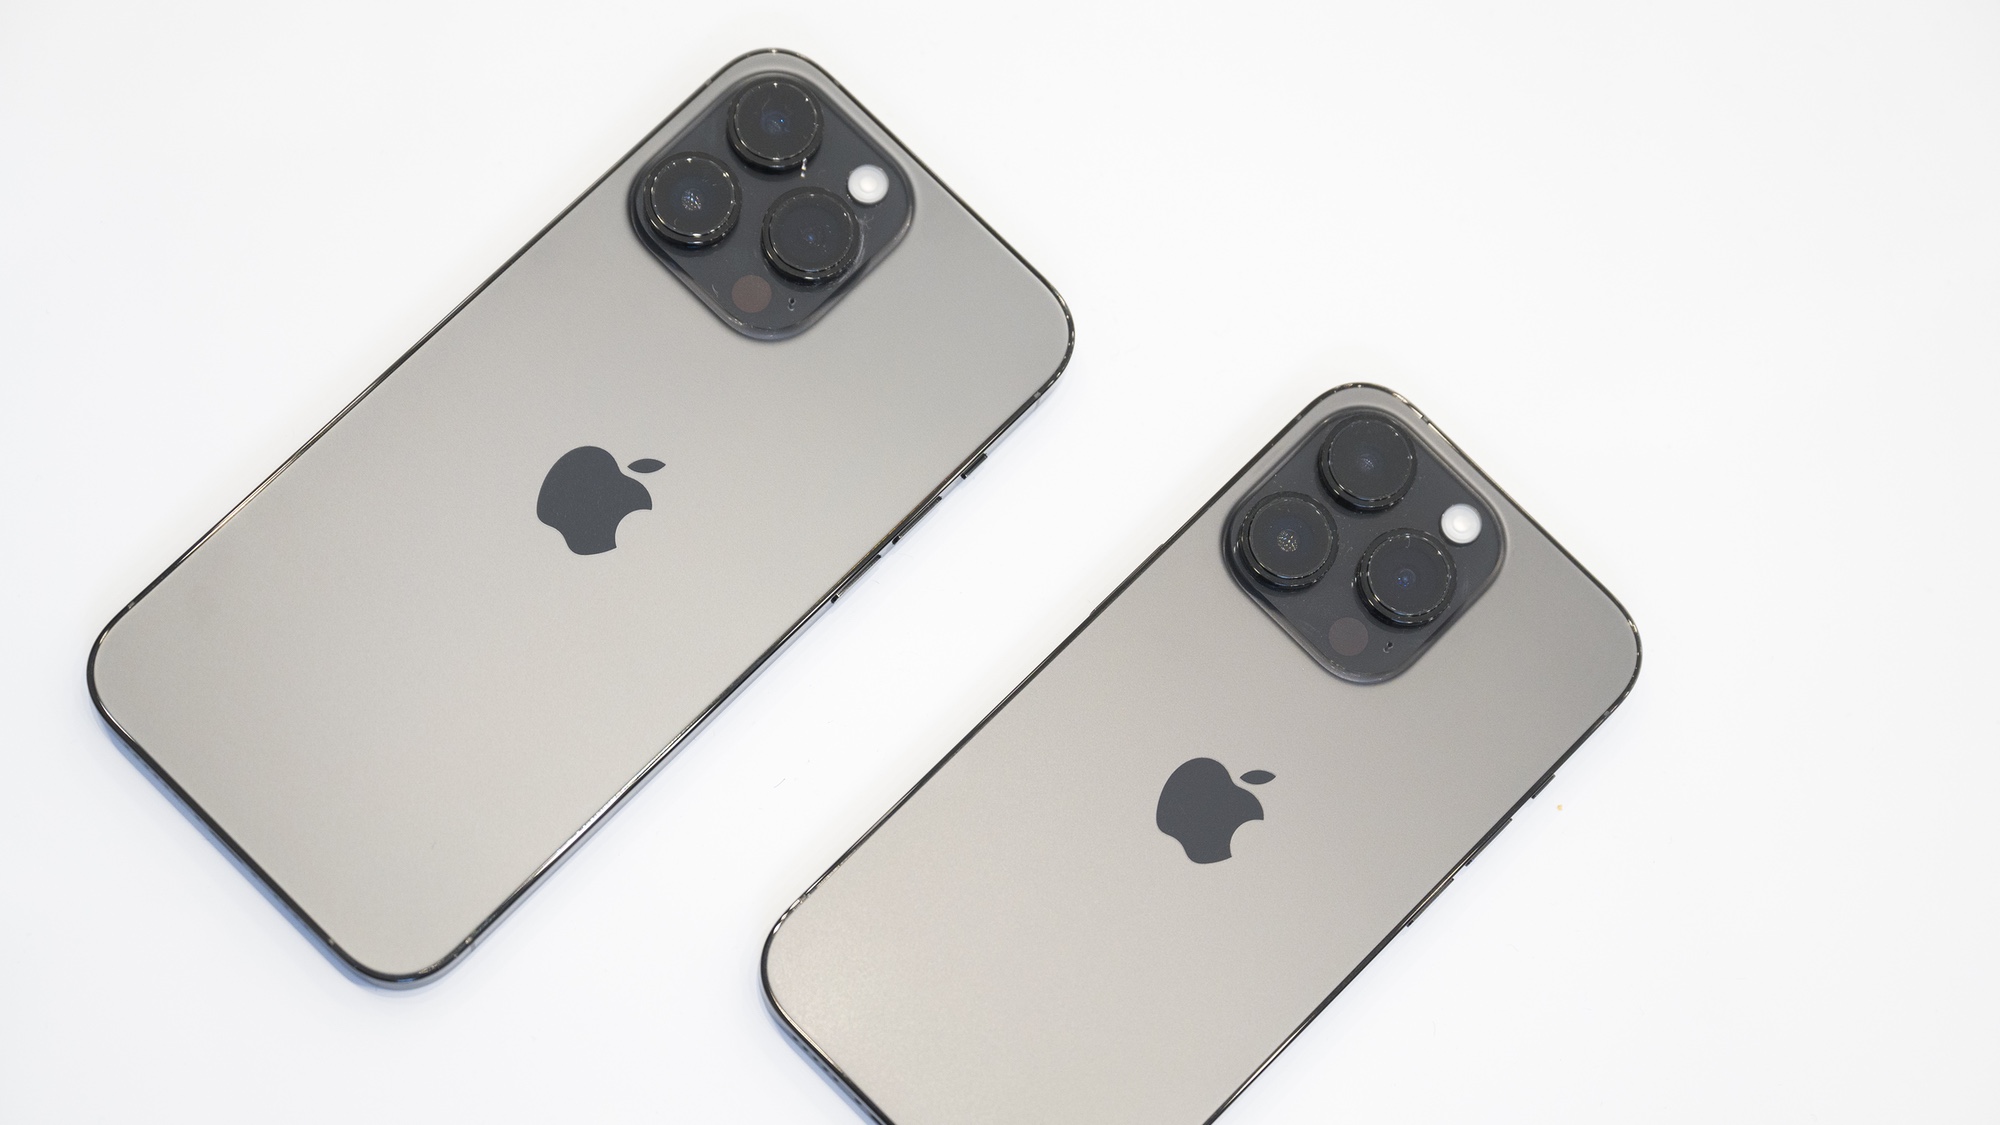 iPhone 14 Pro vs. iPhone 14 Pro Max: Which Pro model should you get?